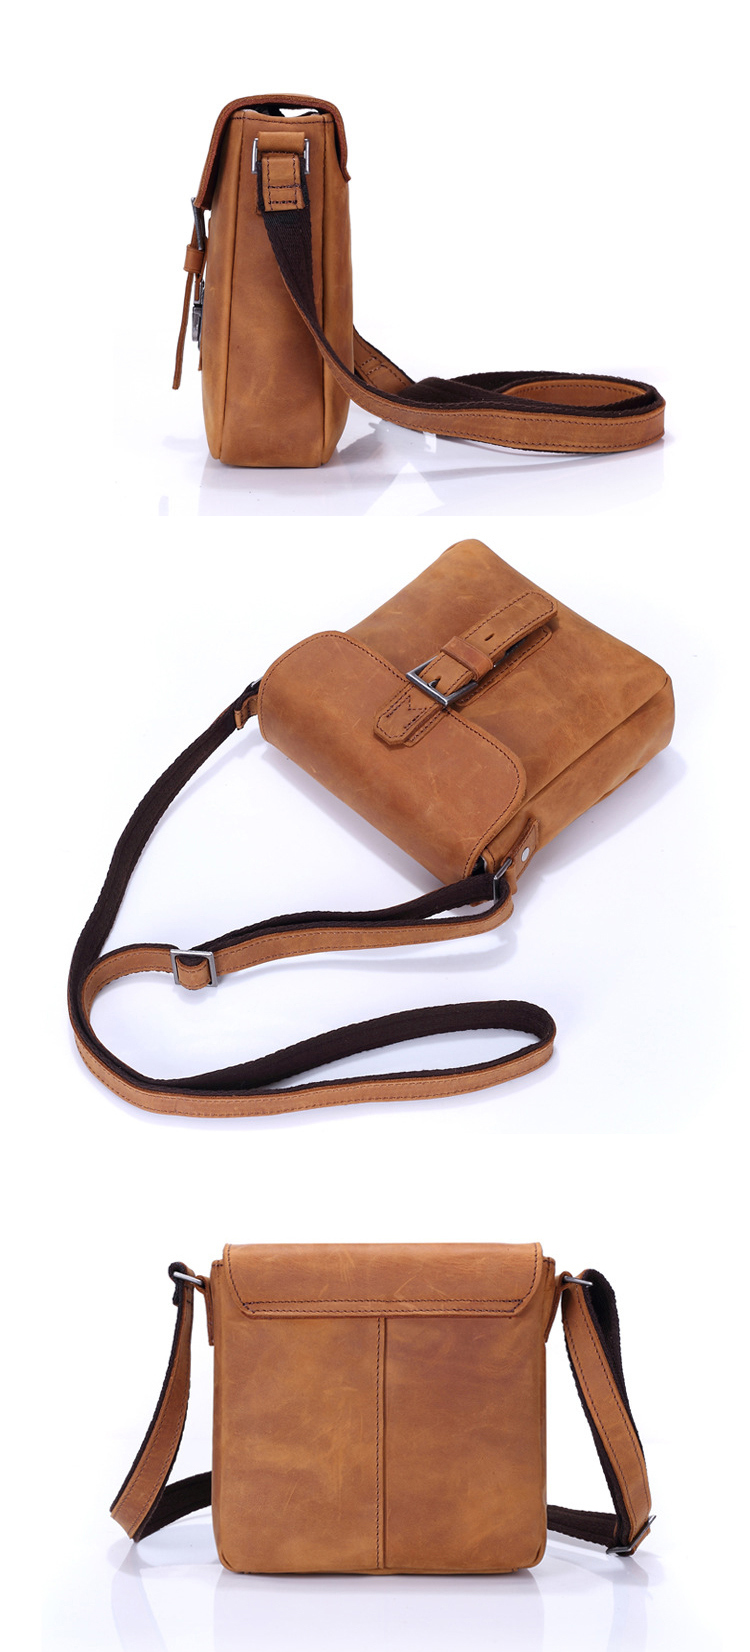 China Factory Cheap Price Leather Shoulder Bag Handbags for Sale